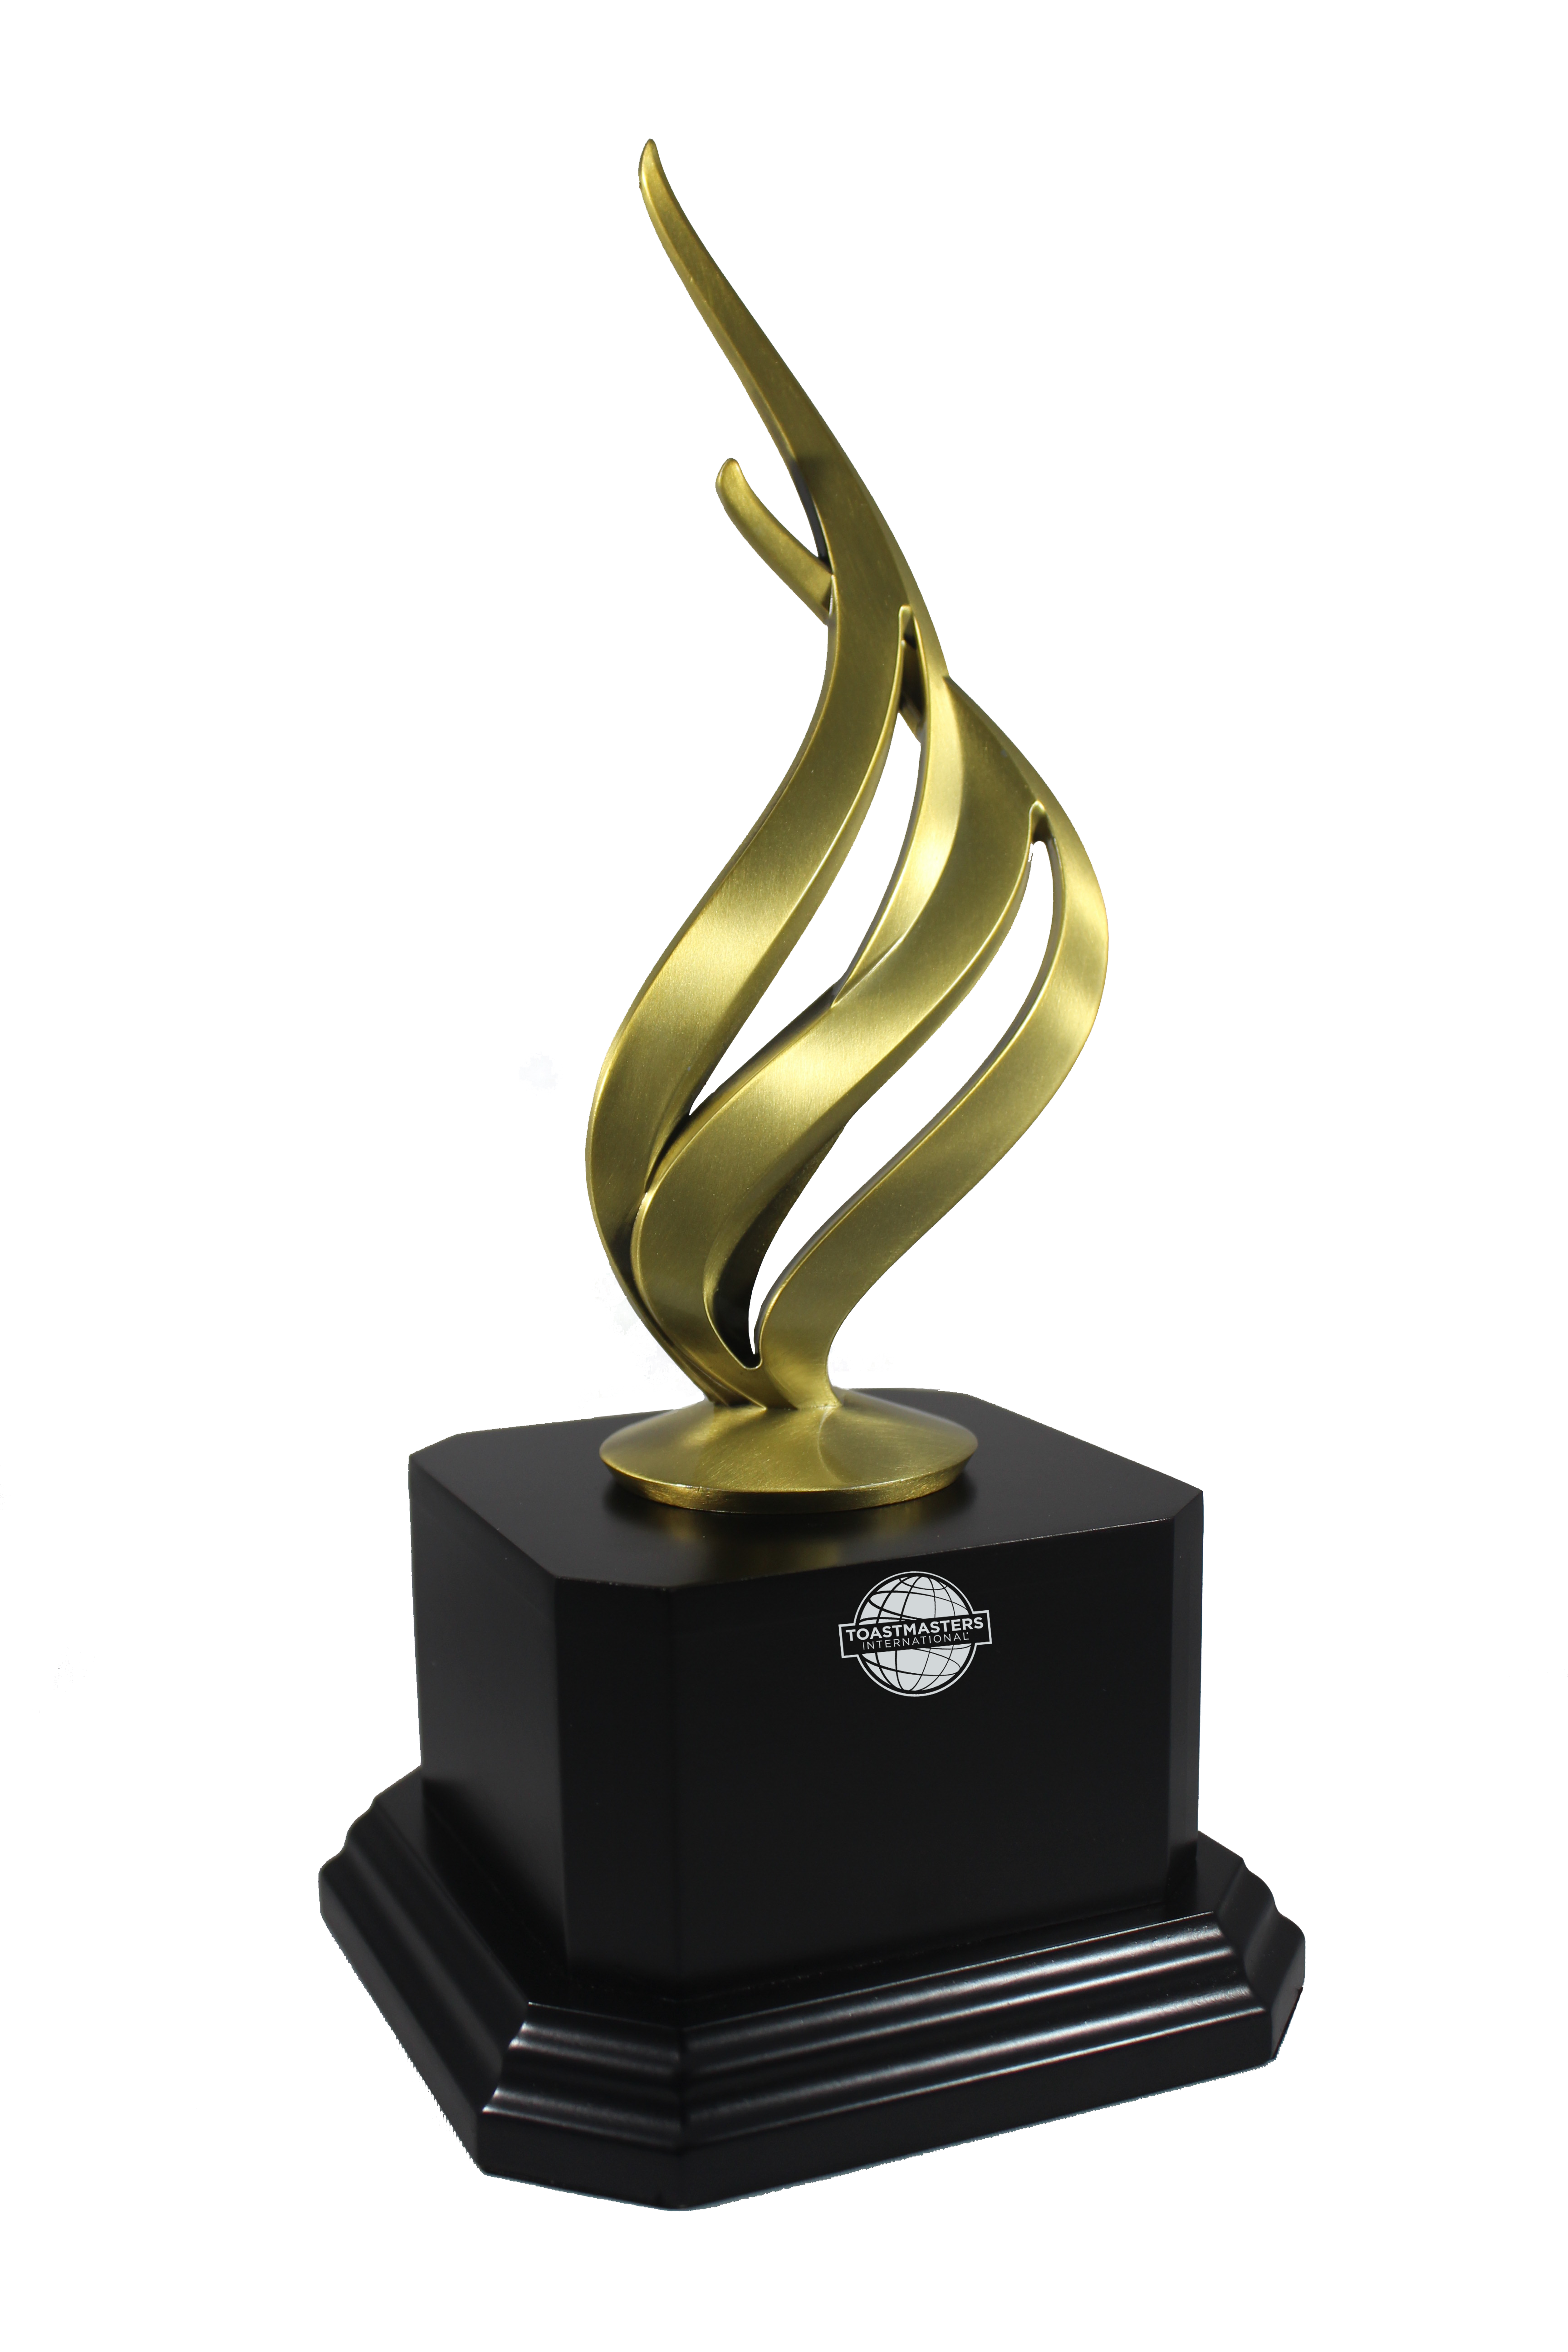 Antique-Flame-Award-Gold-Toastmasters